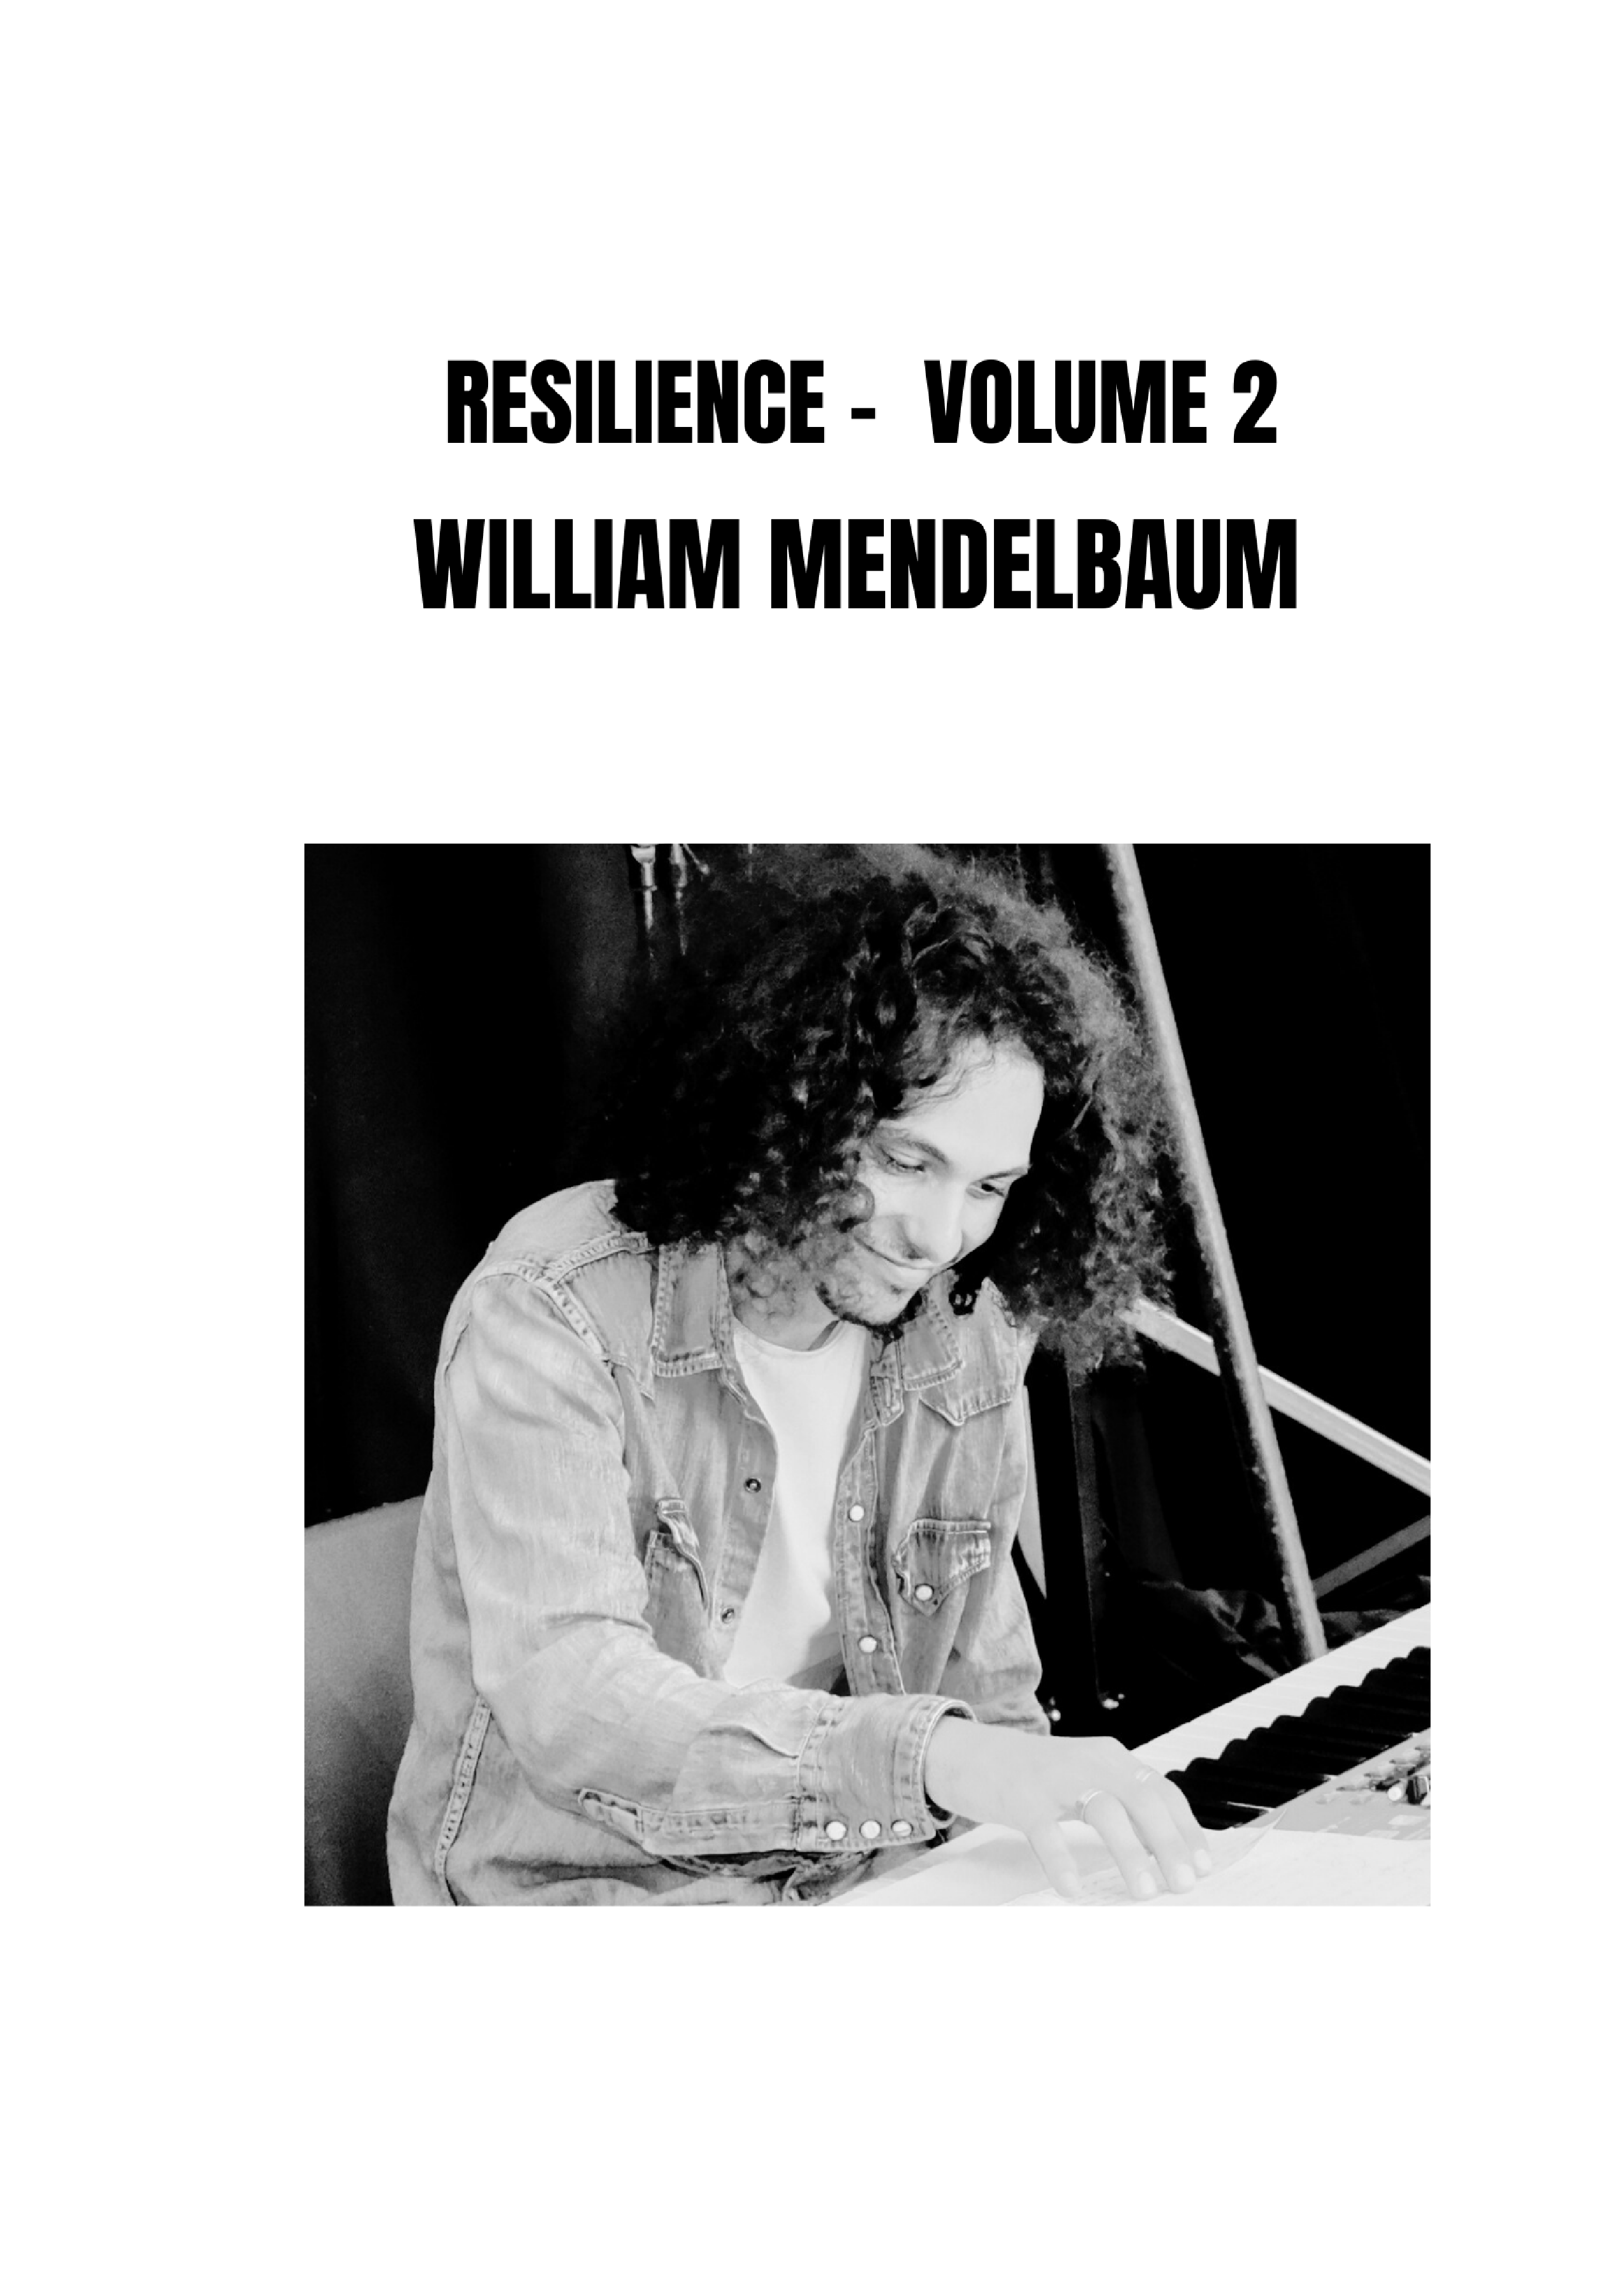 RESILIENCE - VOLUME 2